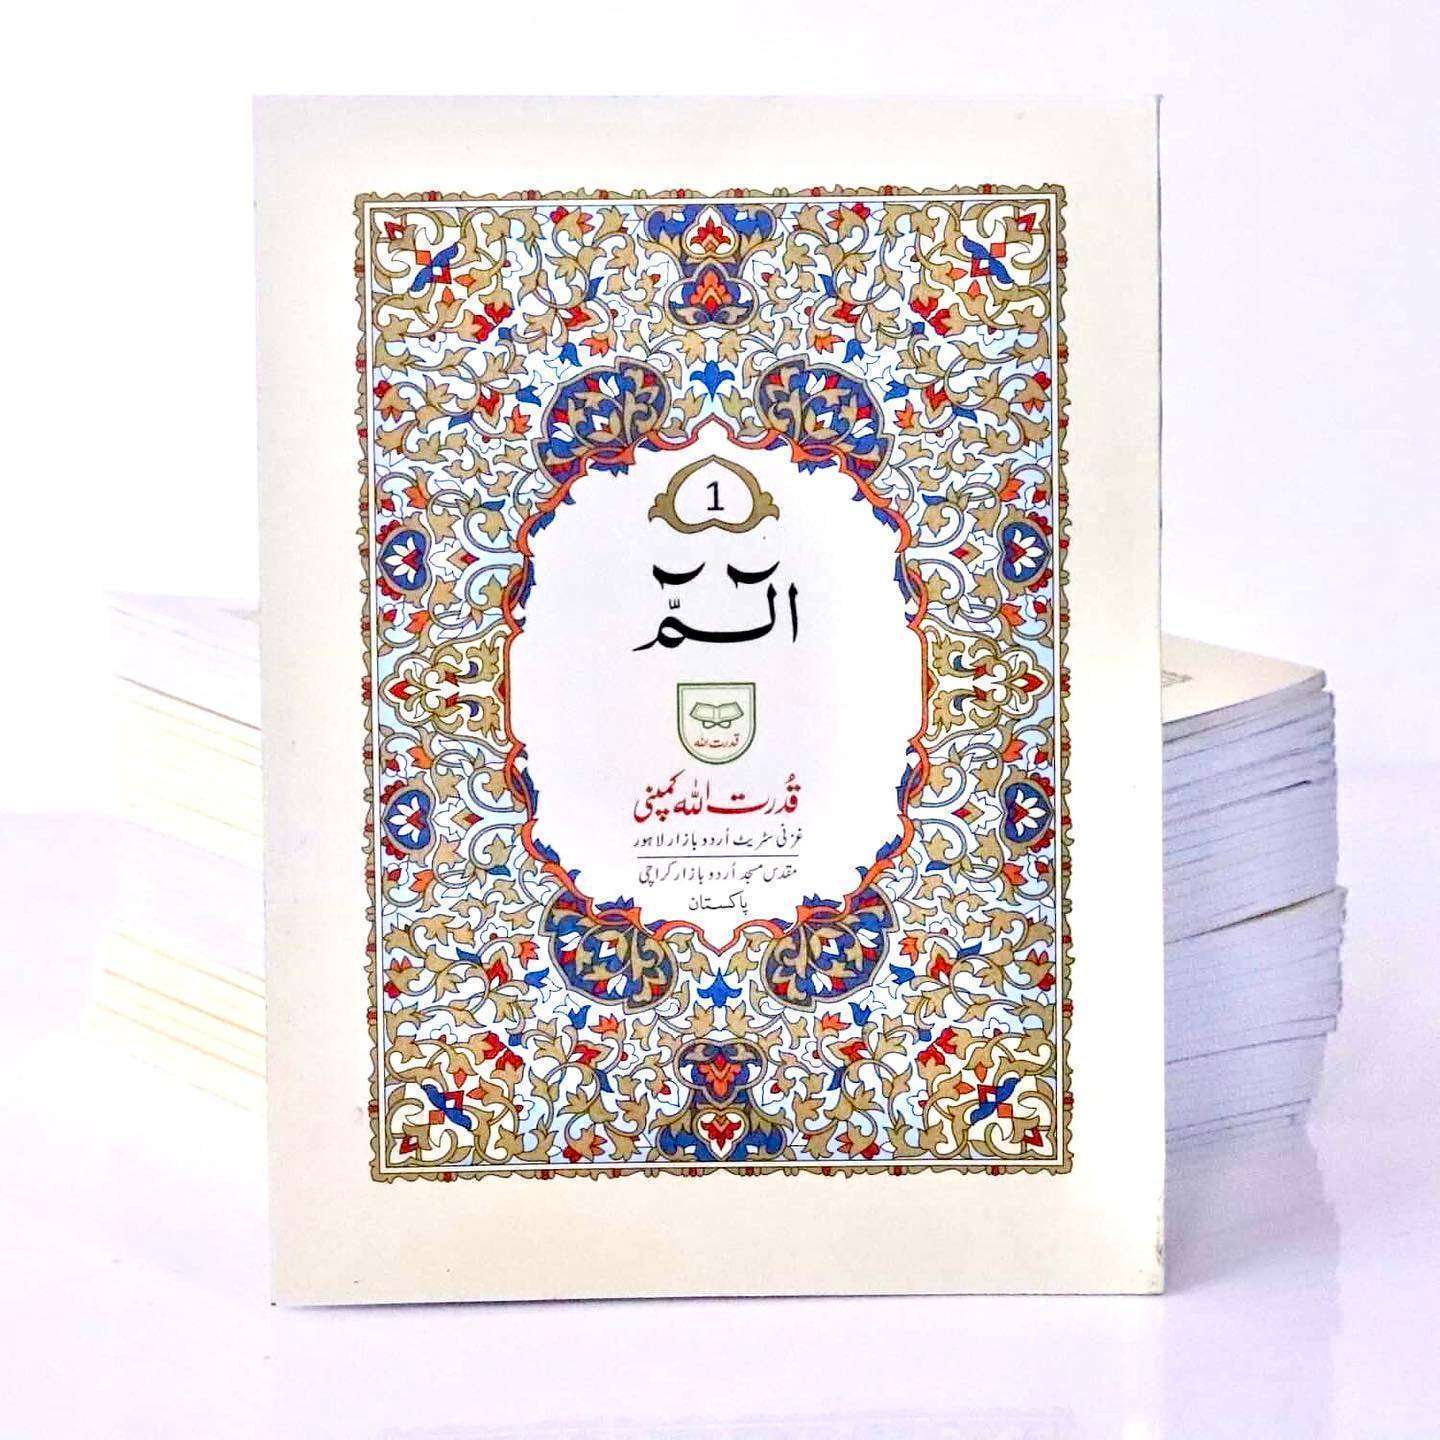 9 Line 30 Sipara Set By Qudratullah Company, Bold Font 30 Sipara Set, Big Font 30 Sipara Set, Holy Quran 30 Sipara Set At AL Rehman Store, Al Rehman Store Is The Best Online Shopping Store In Pakistan